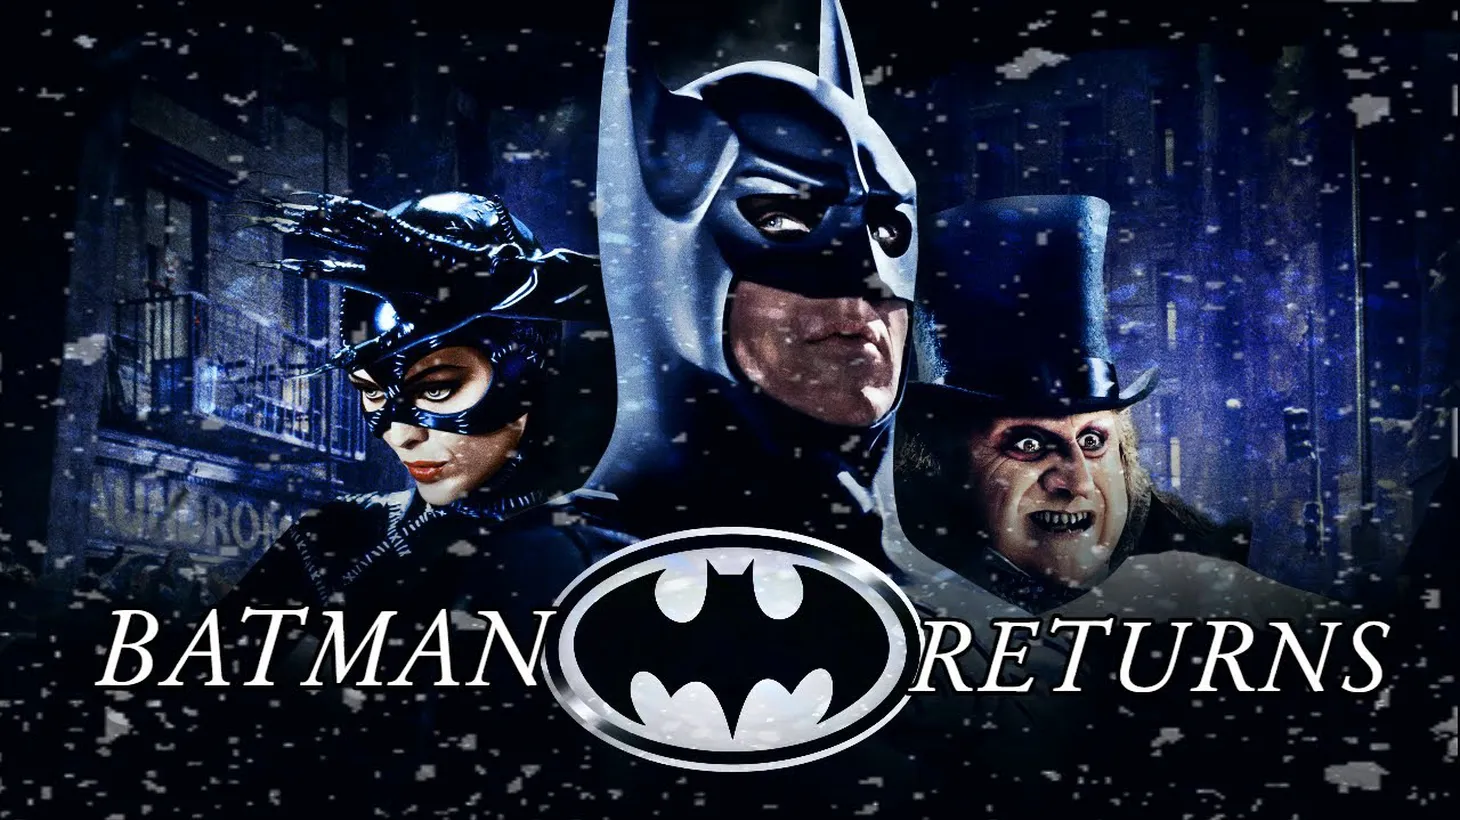 “Batman Returns” stars Michael Keaton as the Caped Crusader, Michelle Pfeiffer as Catwoman, and Danny DeVito as The Penguin.